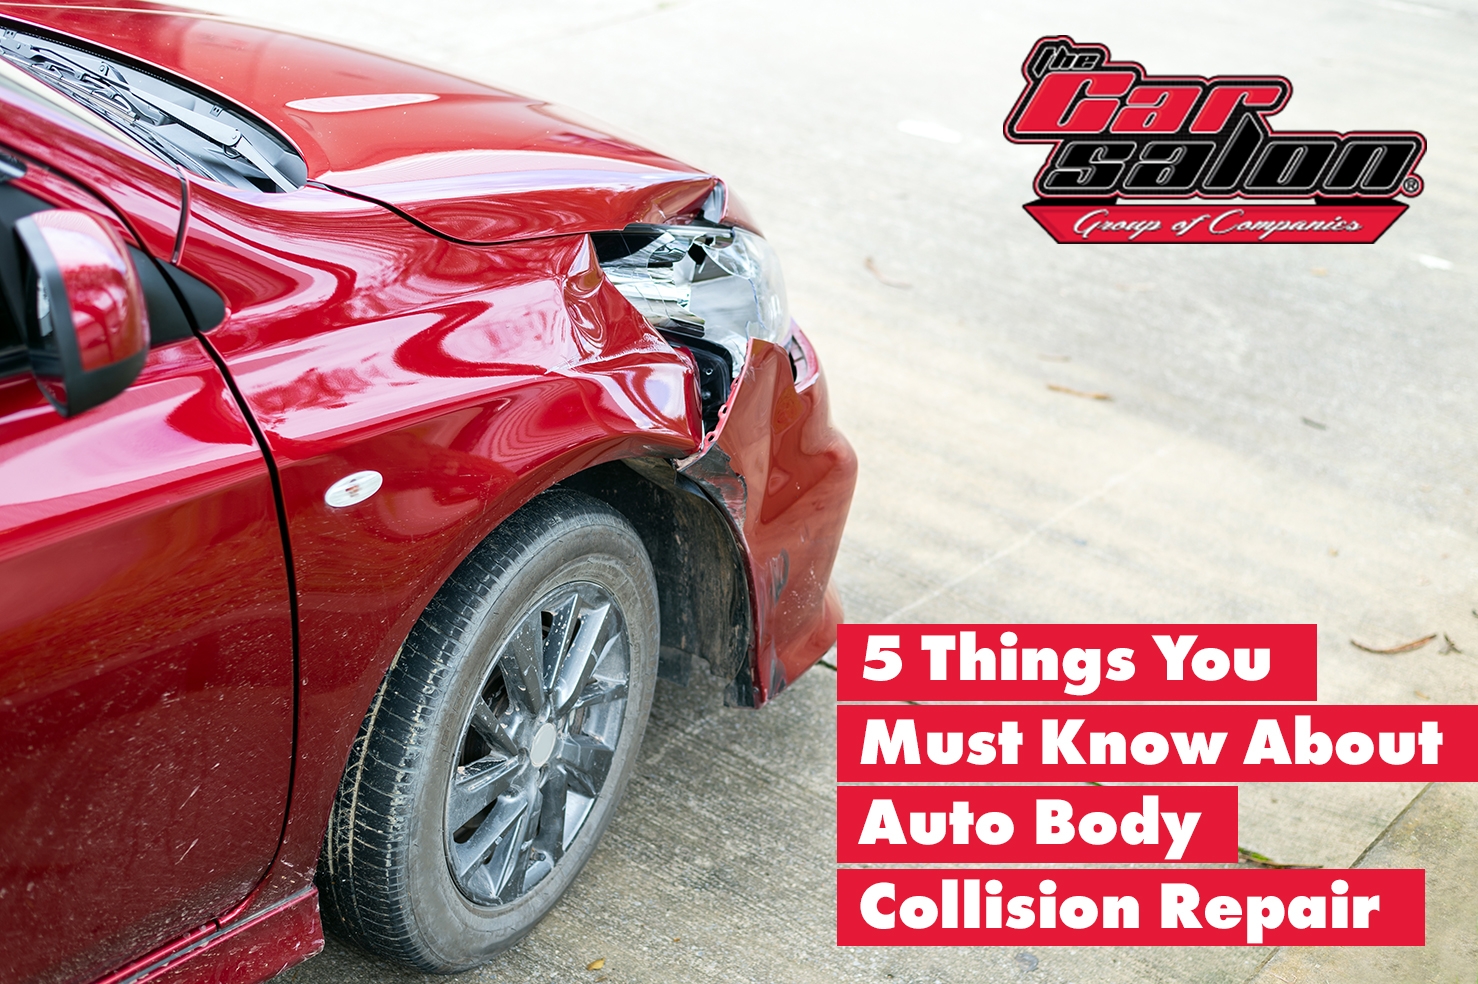 5 Things You Must Know About Auto Body Collision Repair